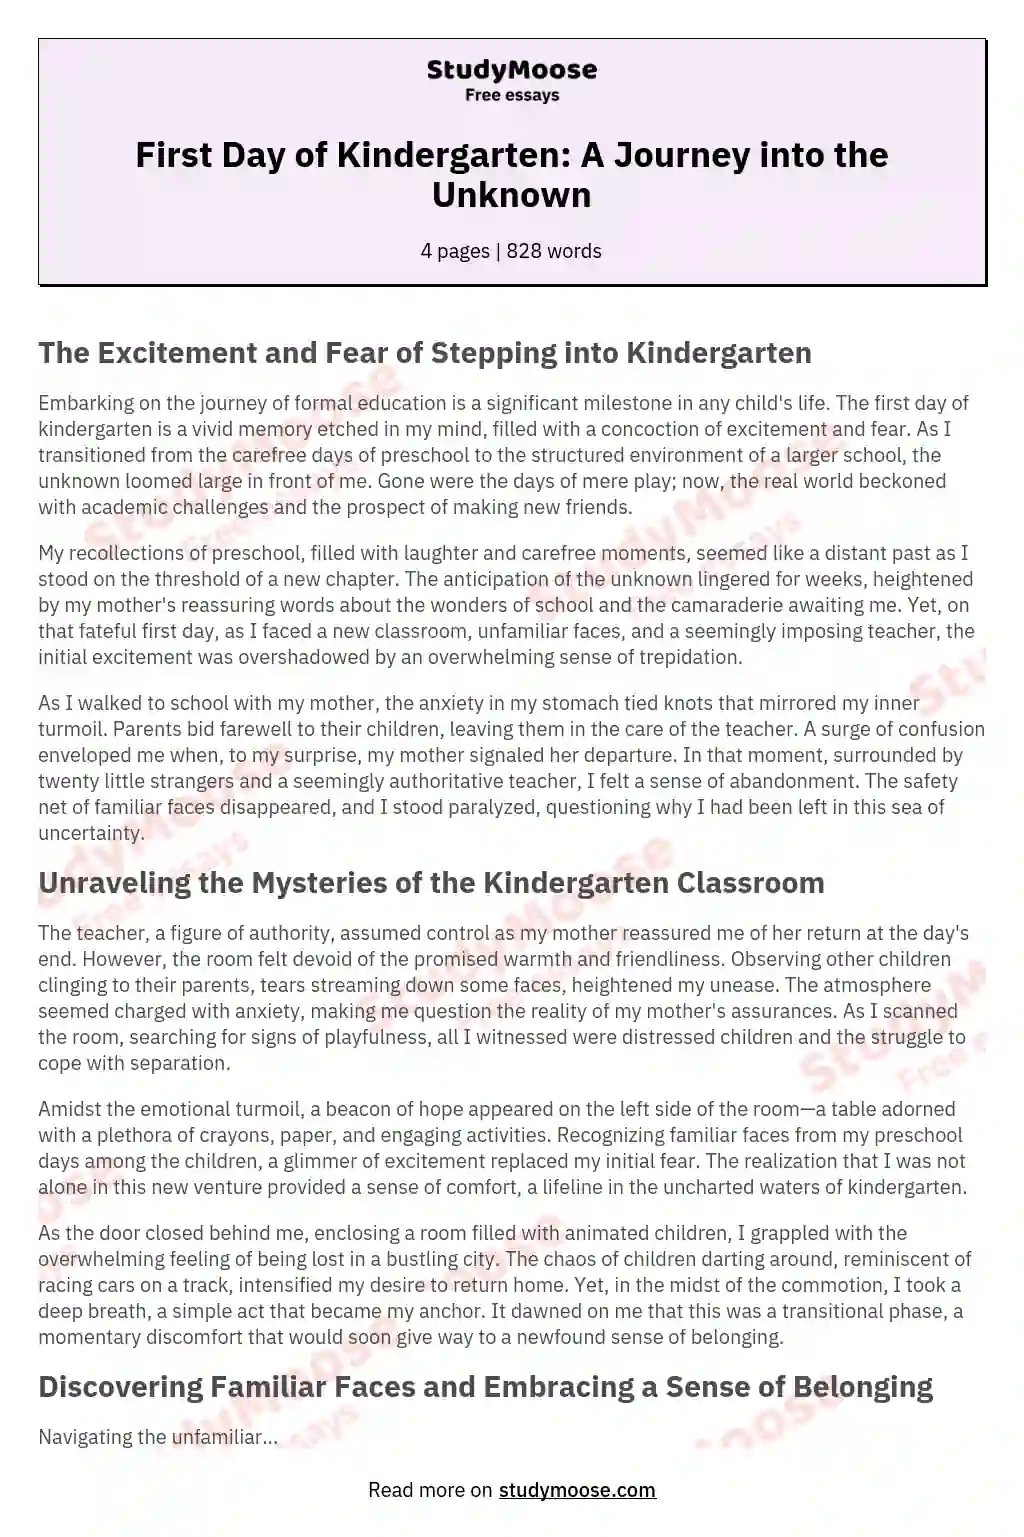 First Day of Kindergarten: A Journey into the Unknown essay